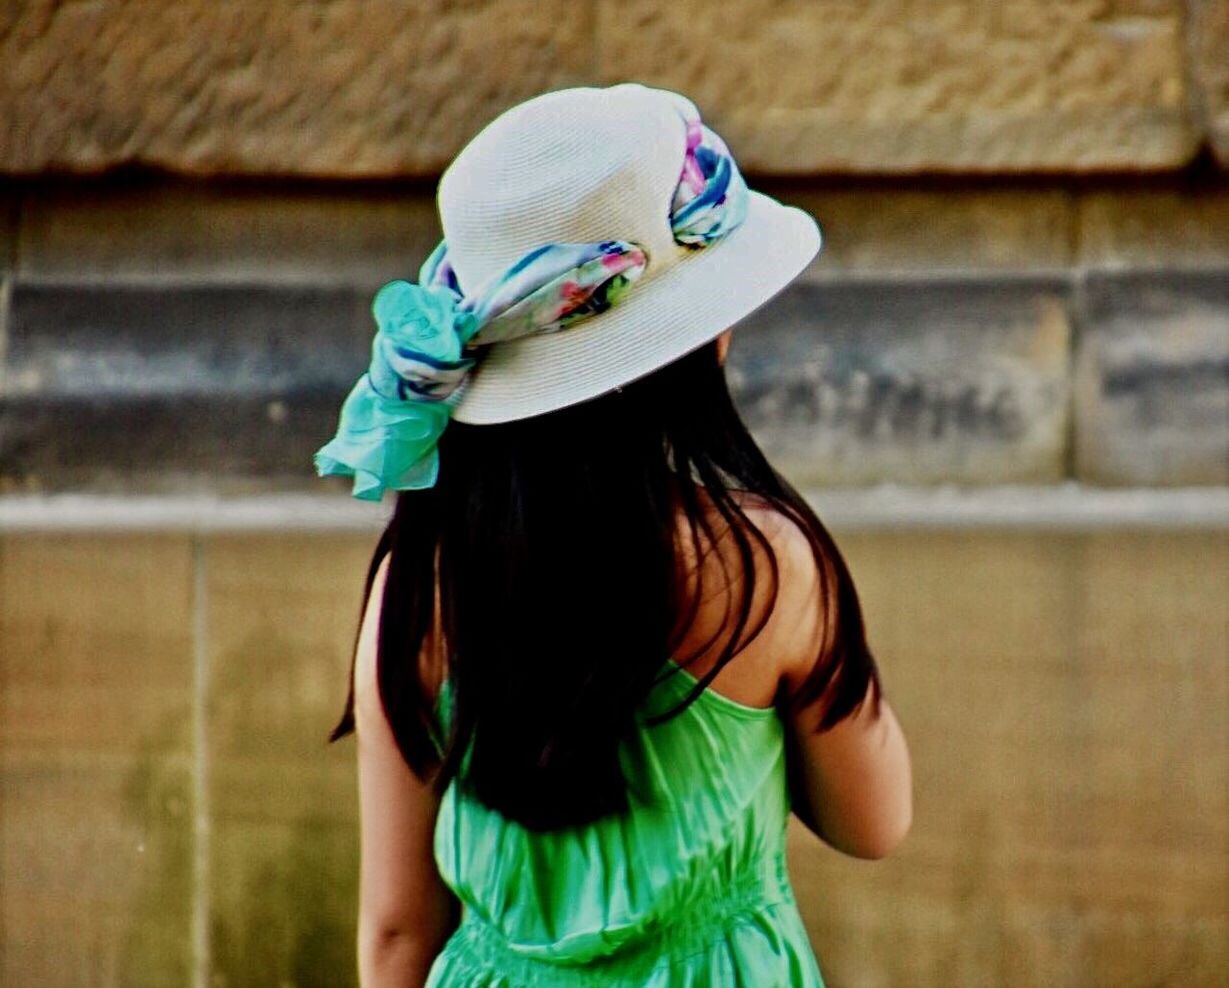 Rear view of girl wearing hat while standing against wall